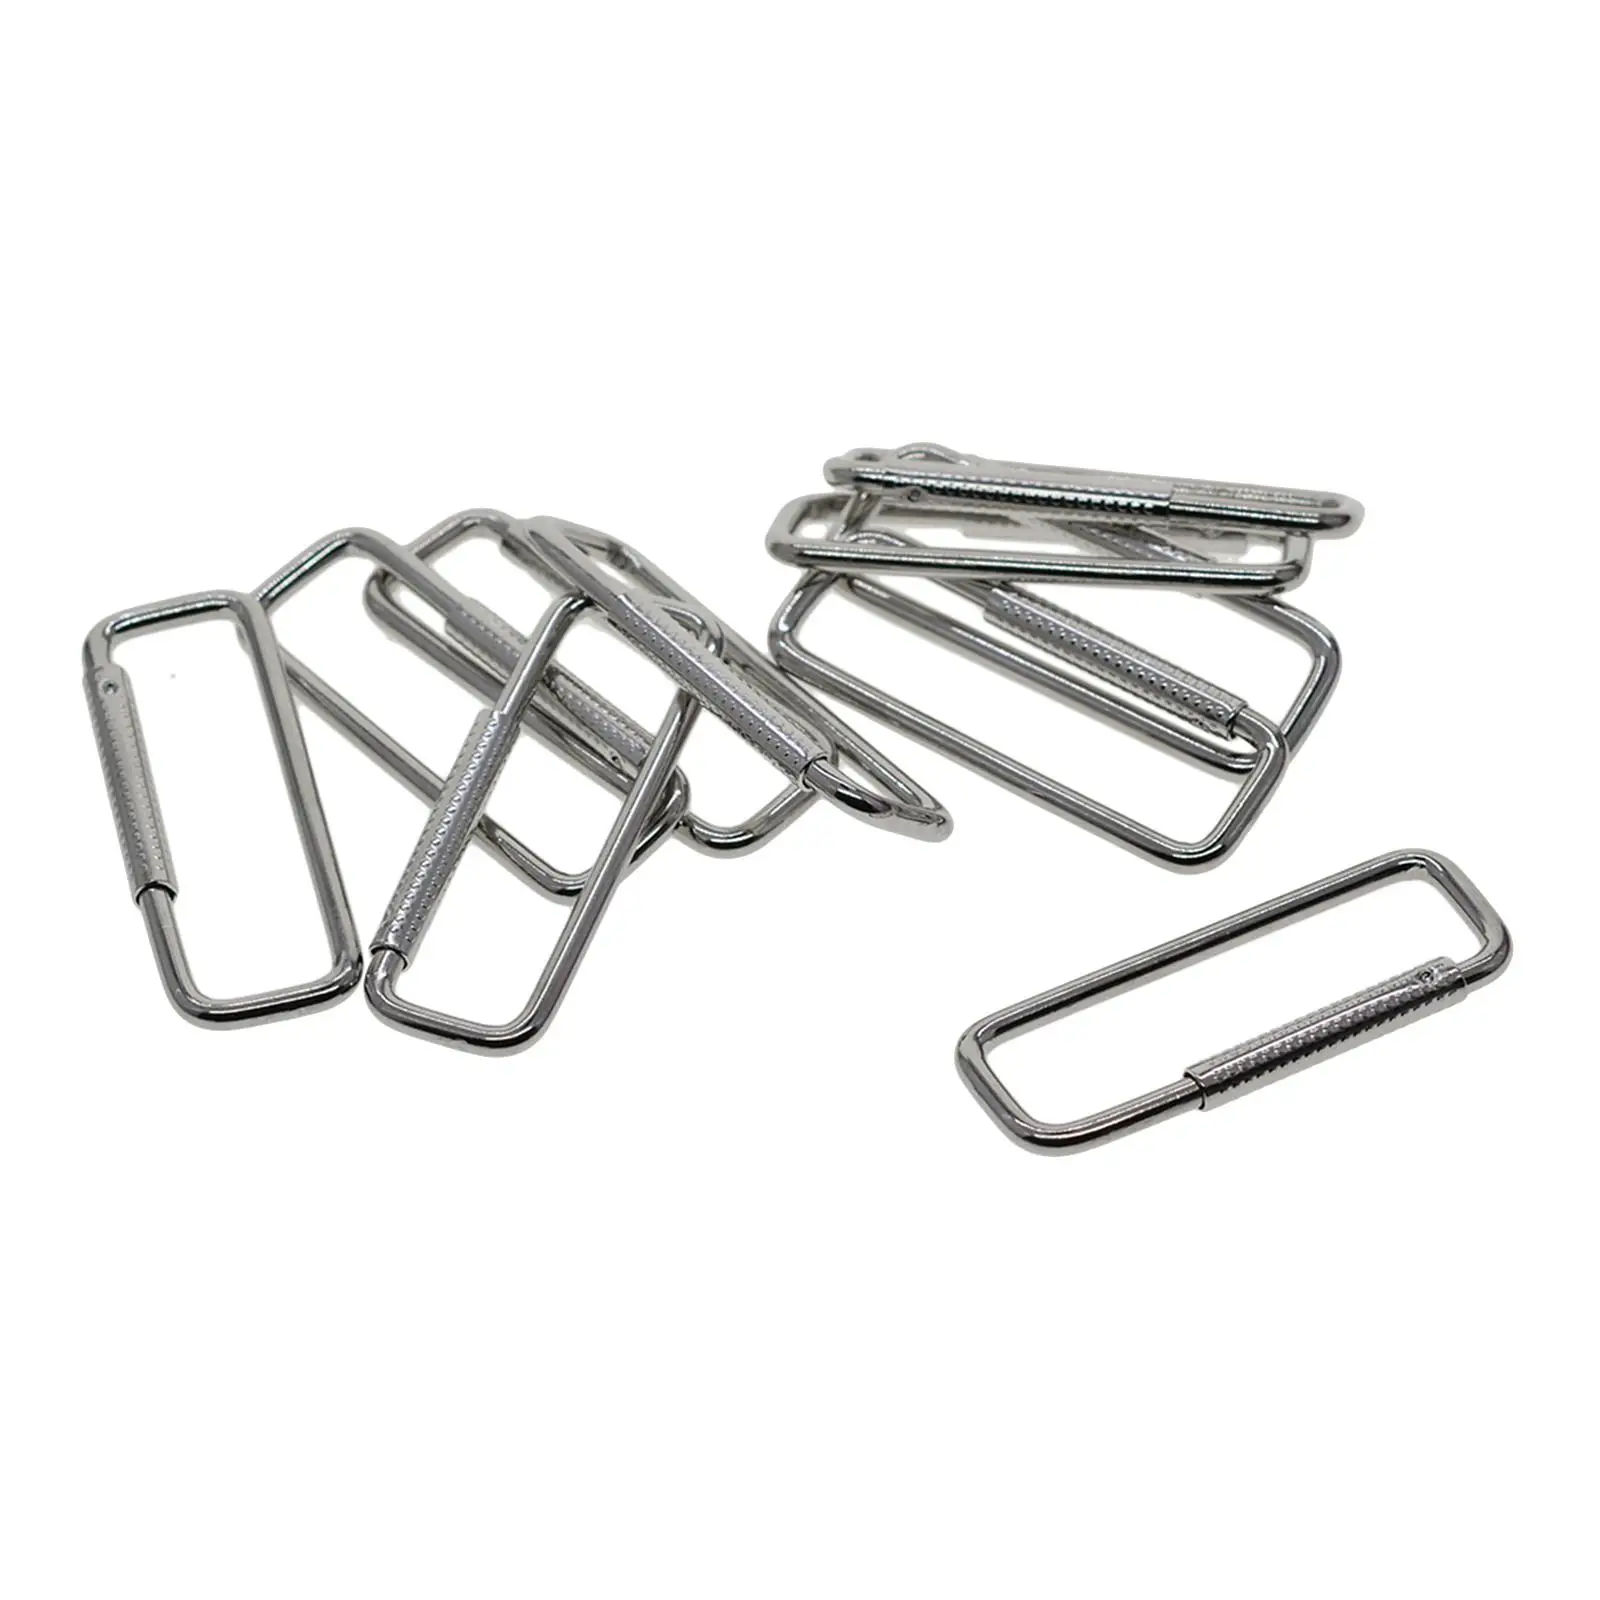 10x Rectangle Carabiner Clips Spring Buckle Metal Portable Durable Multipurpose